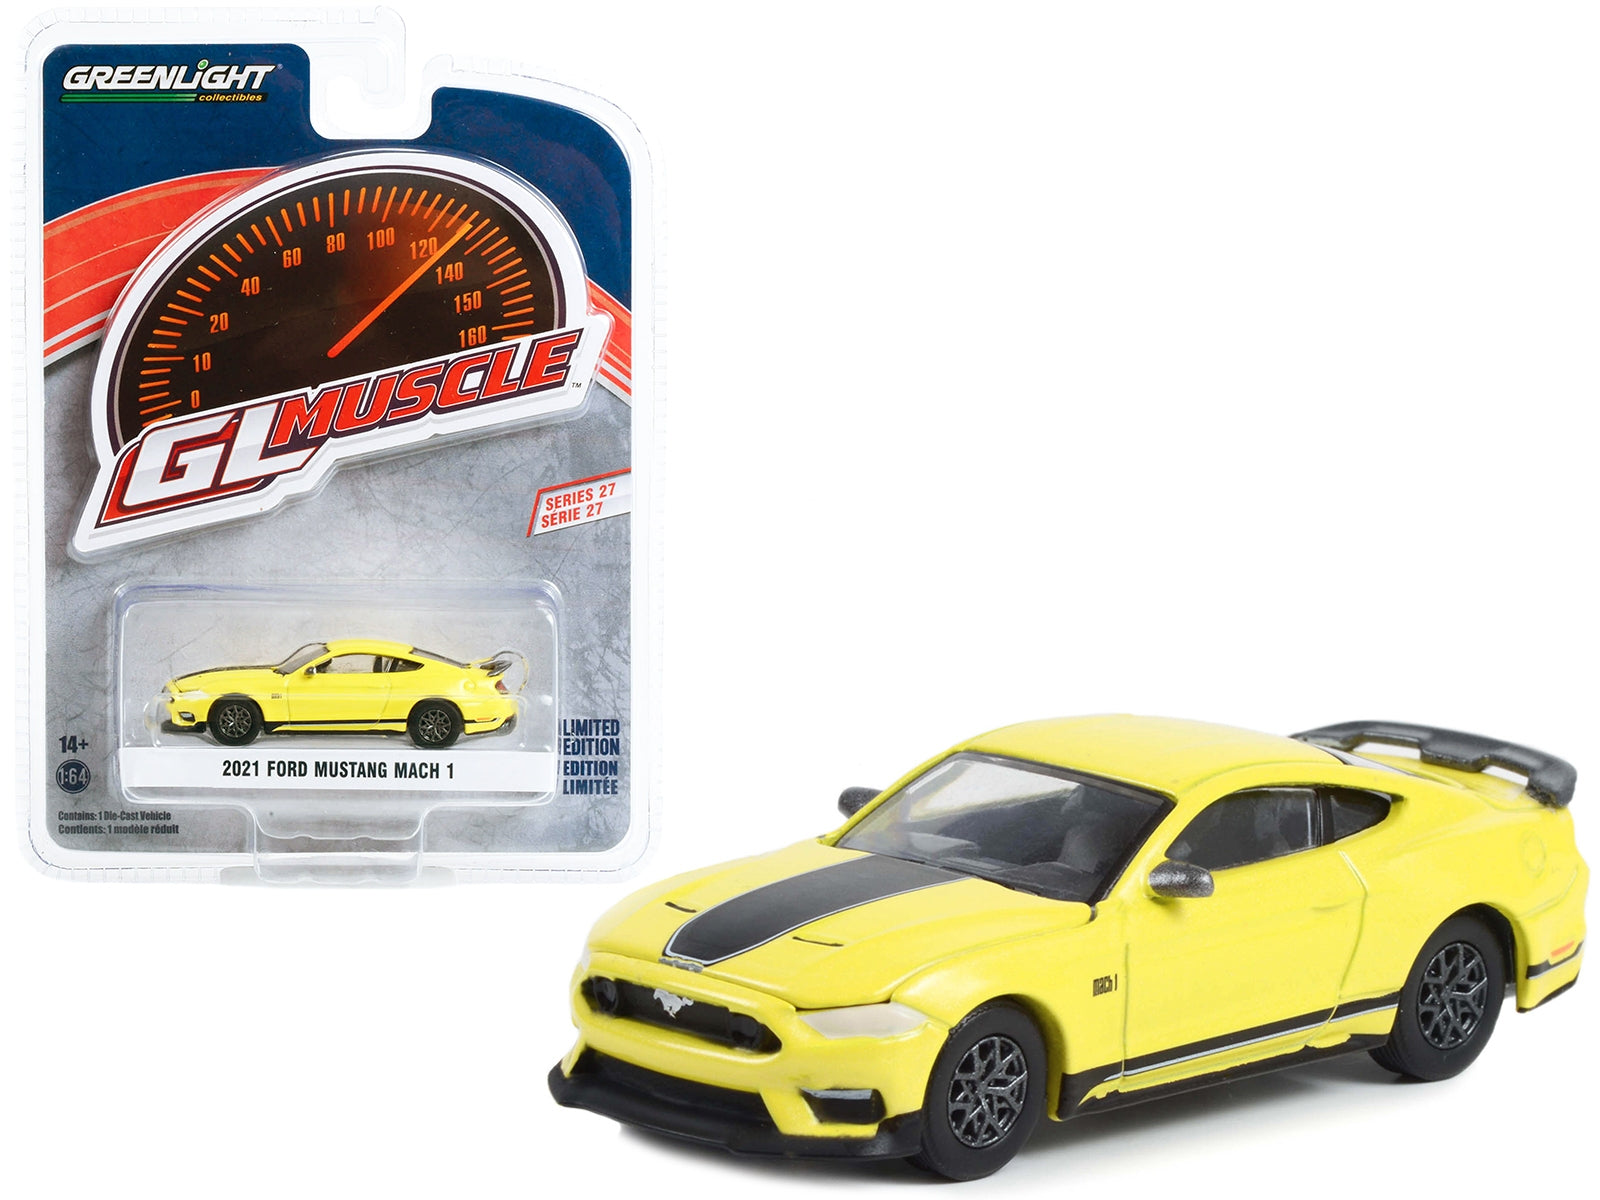 2021 Ford Mustang Mach 1 Grabber Yellow with Black Stripes "Greenlight Muscle" Series 27 1/64 Diecast Model Car by Greenlight